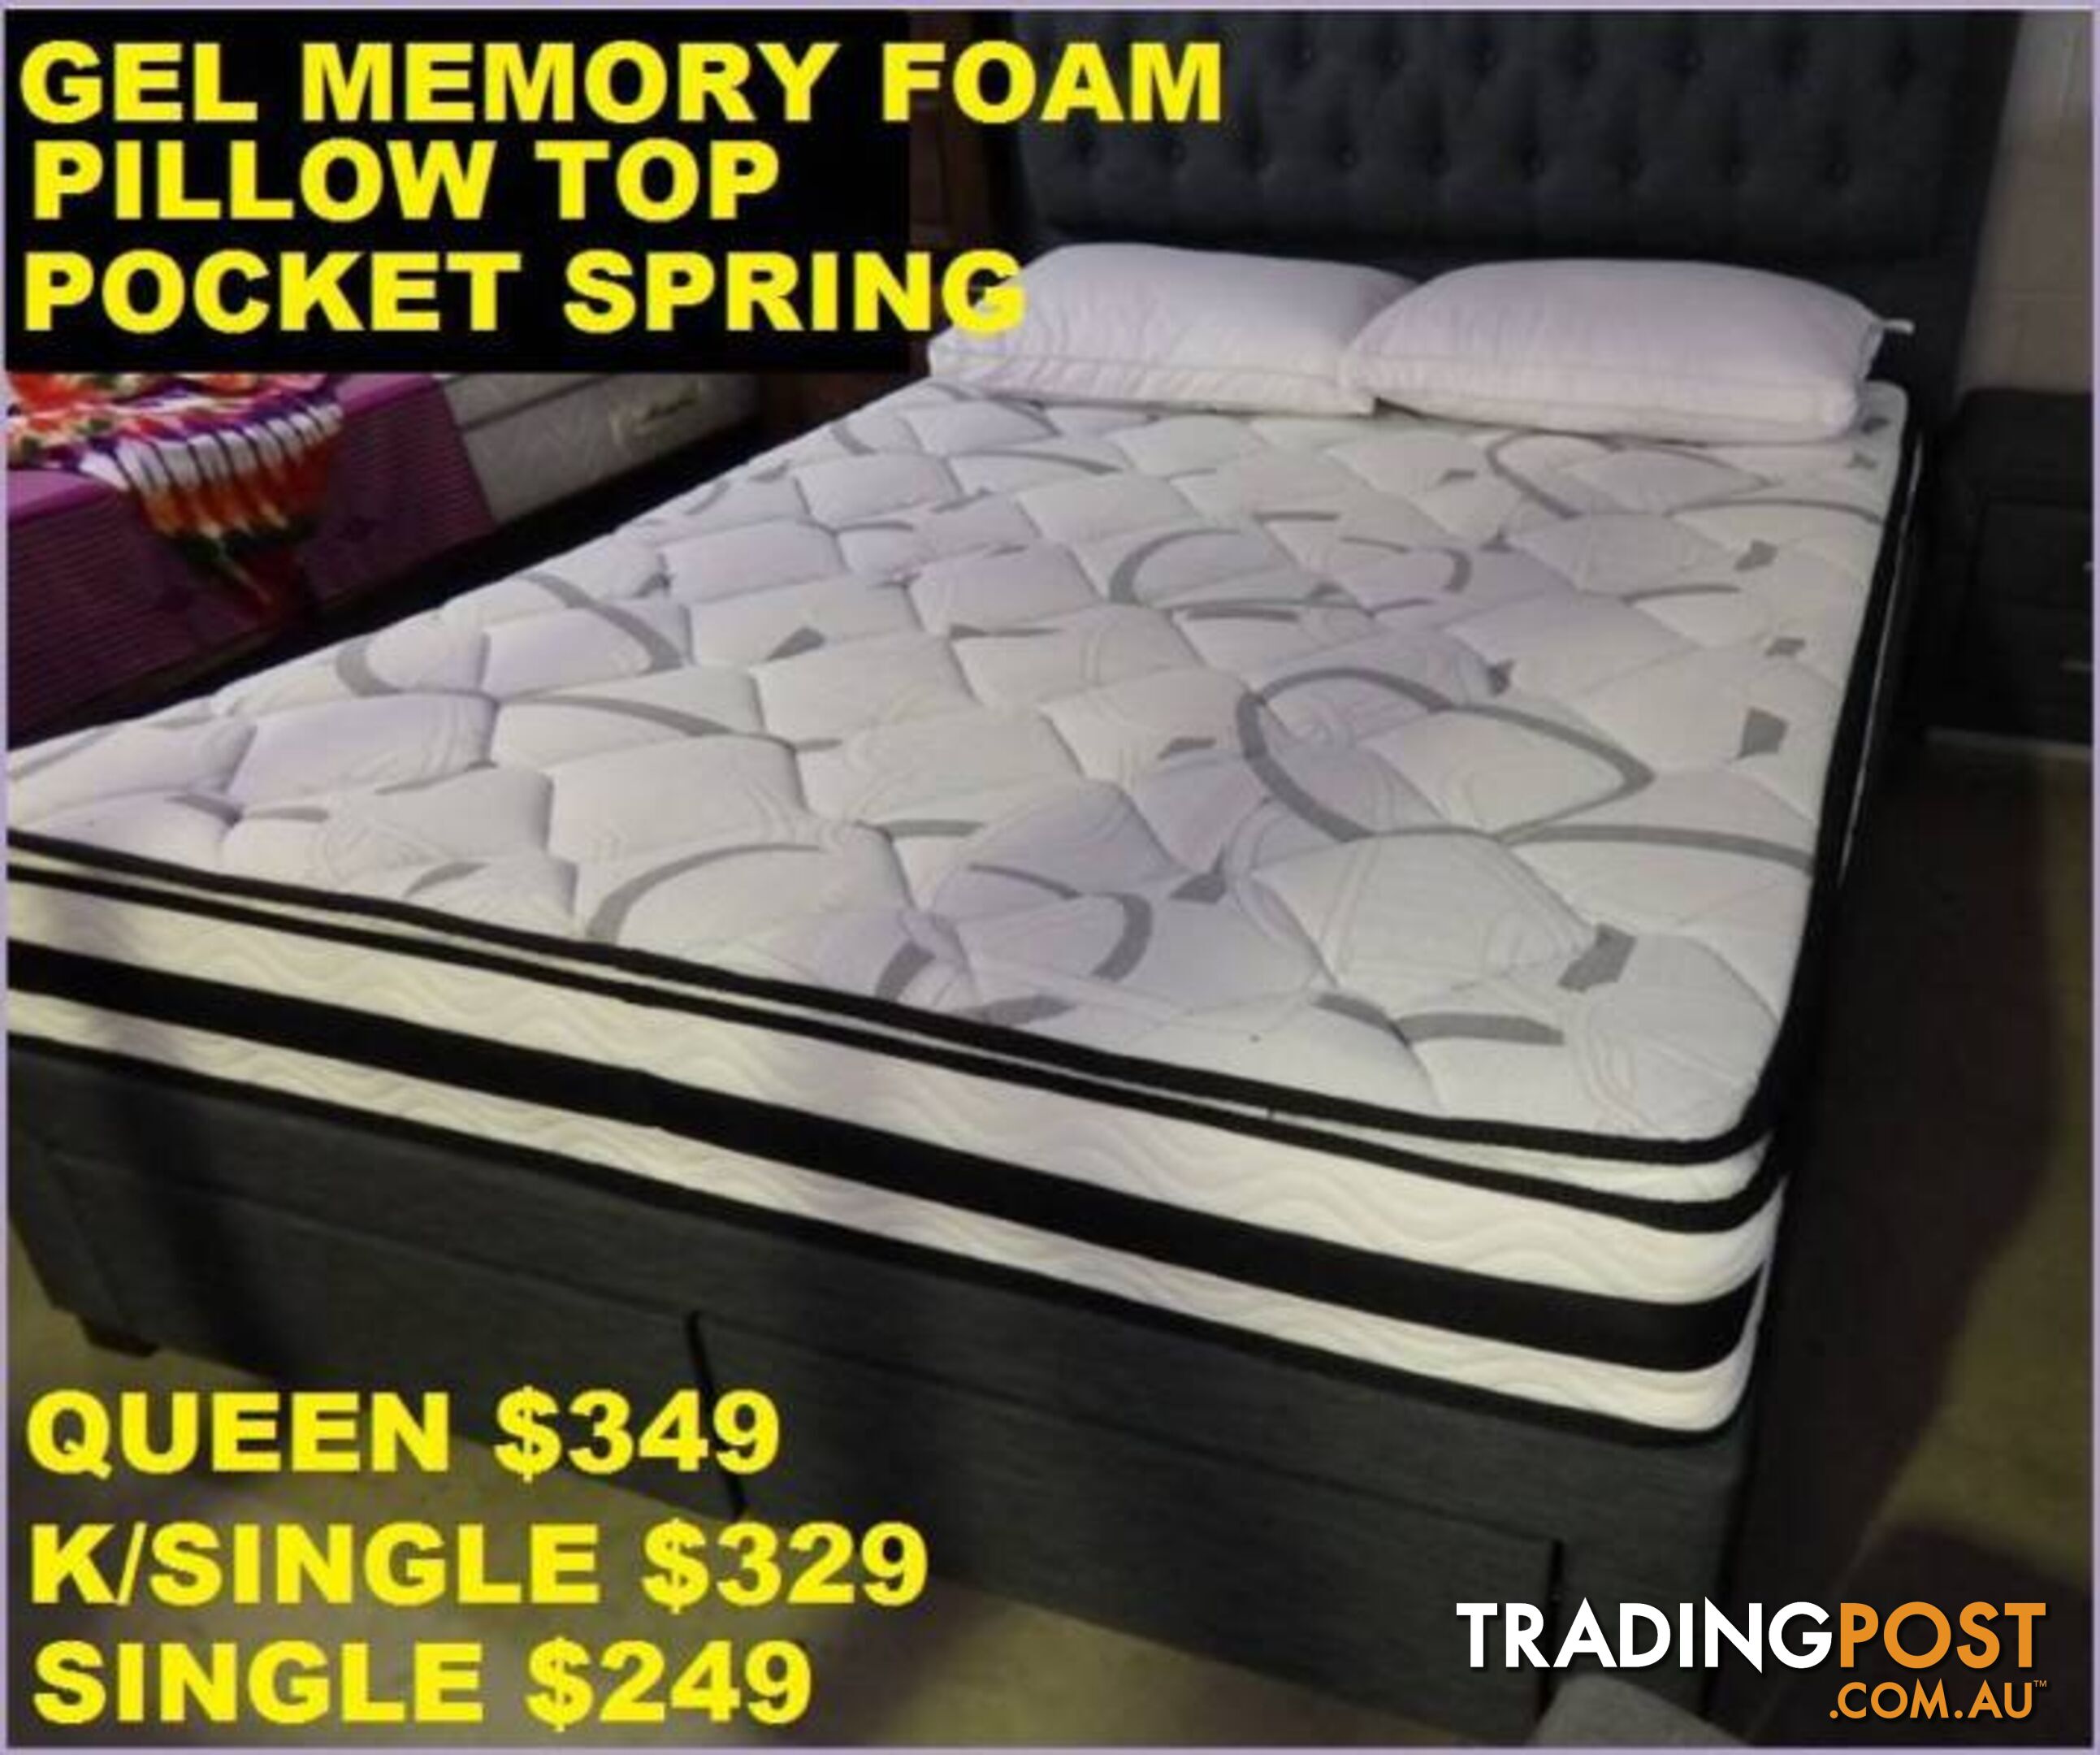 New Furniture, Bedding and Electrical Warehouse Direct $50% OFF